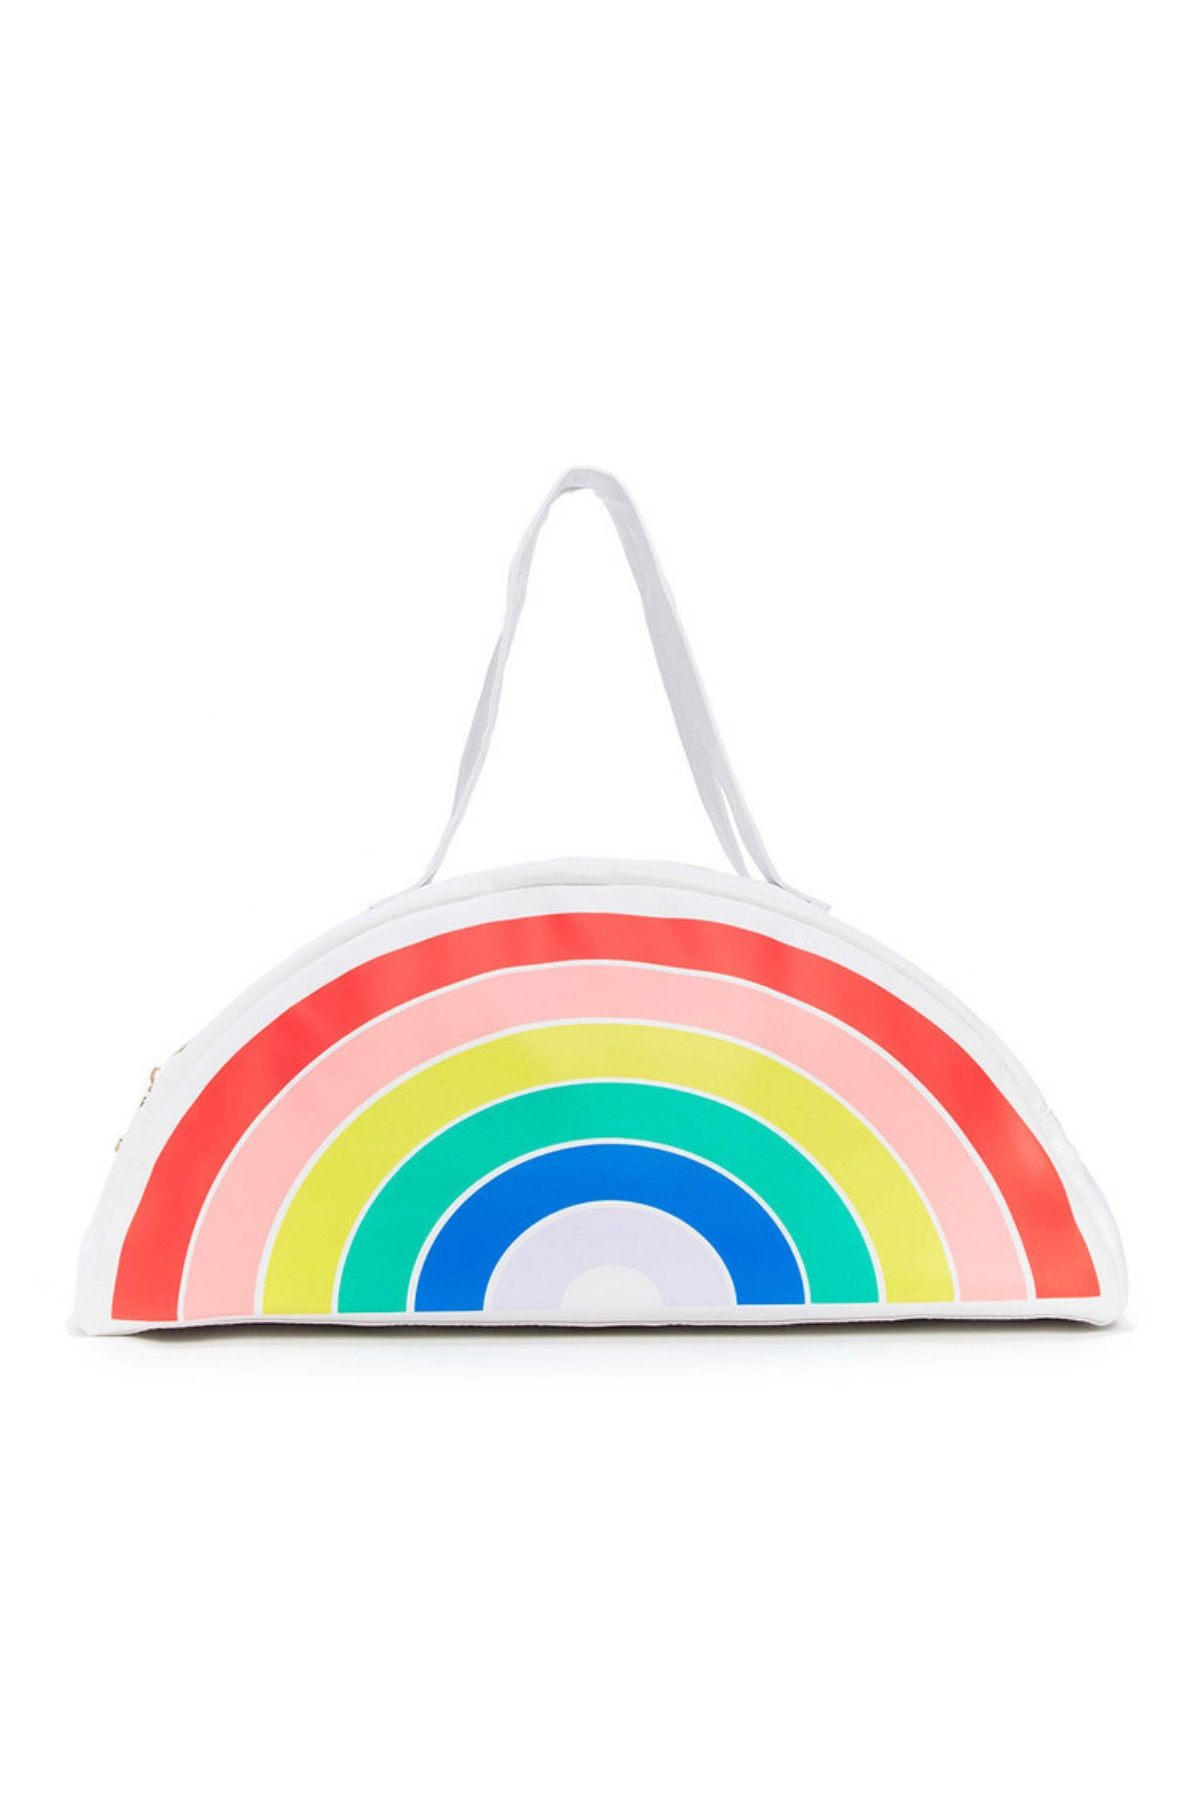 Ban.do White/Rainbow Super Chill Large Cooler Bag